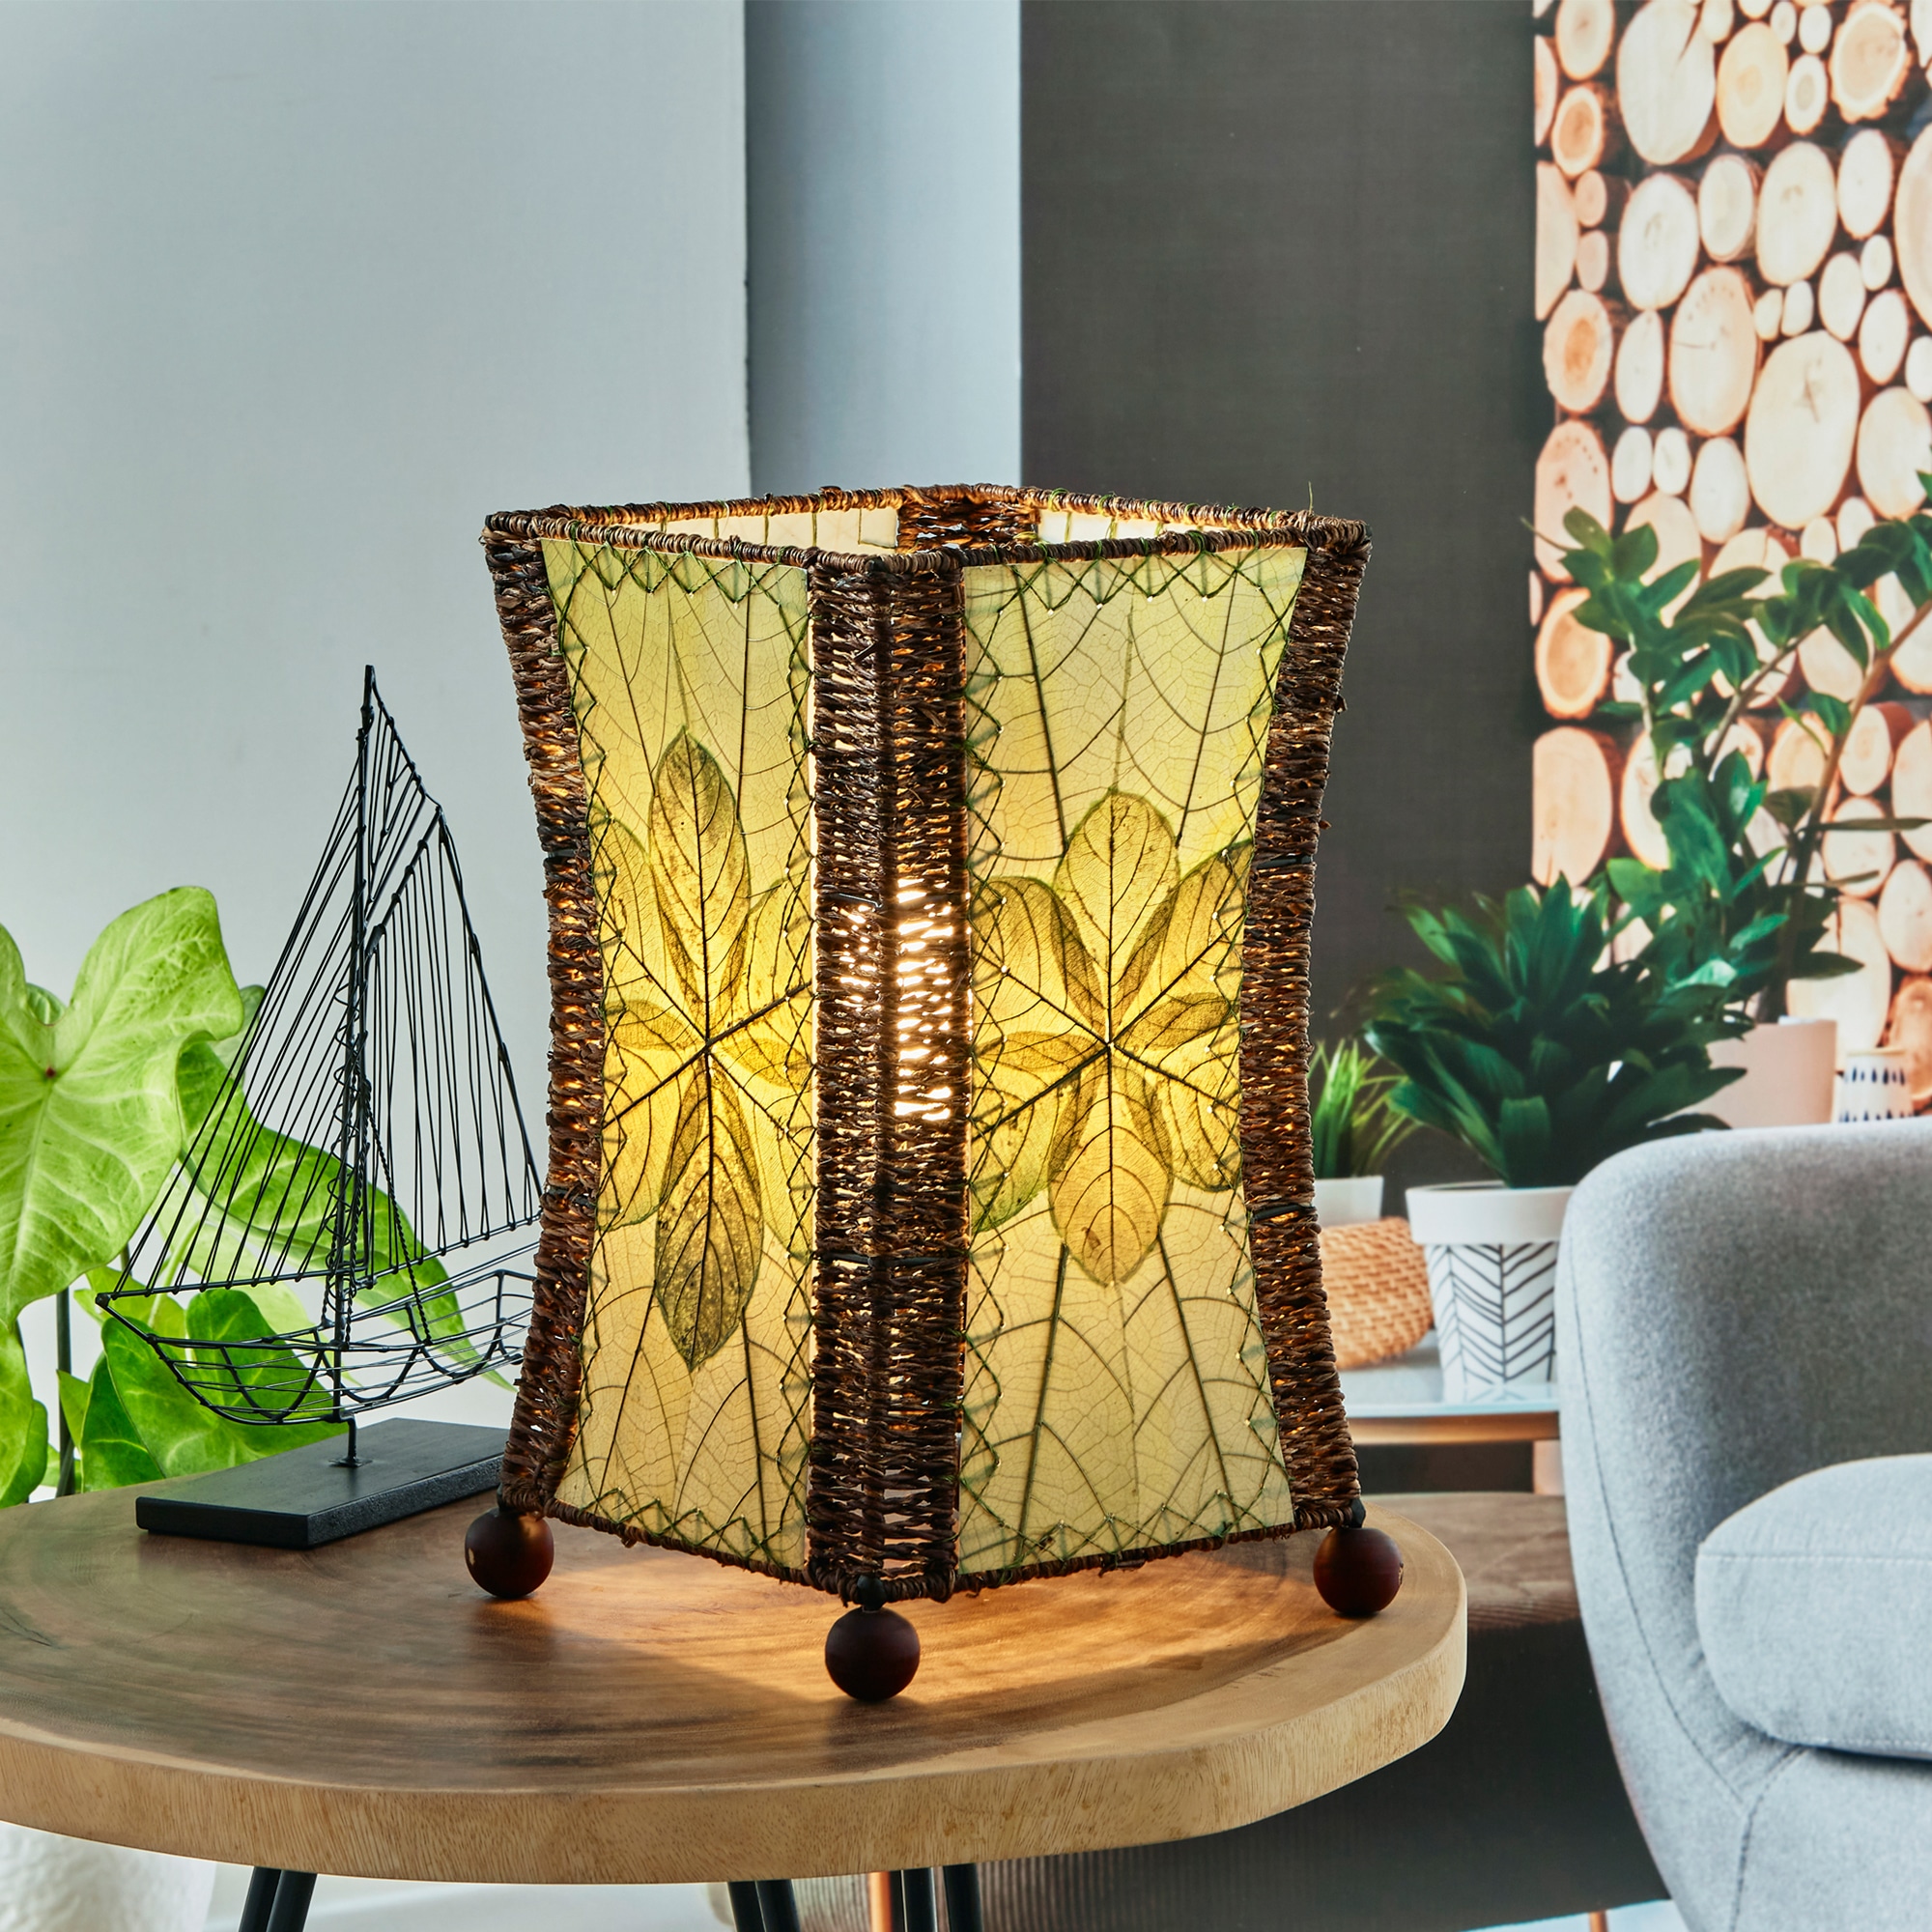 Hourglass Table Lamp